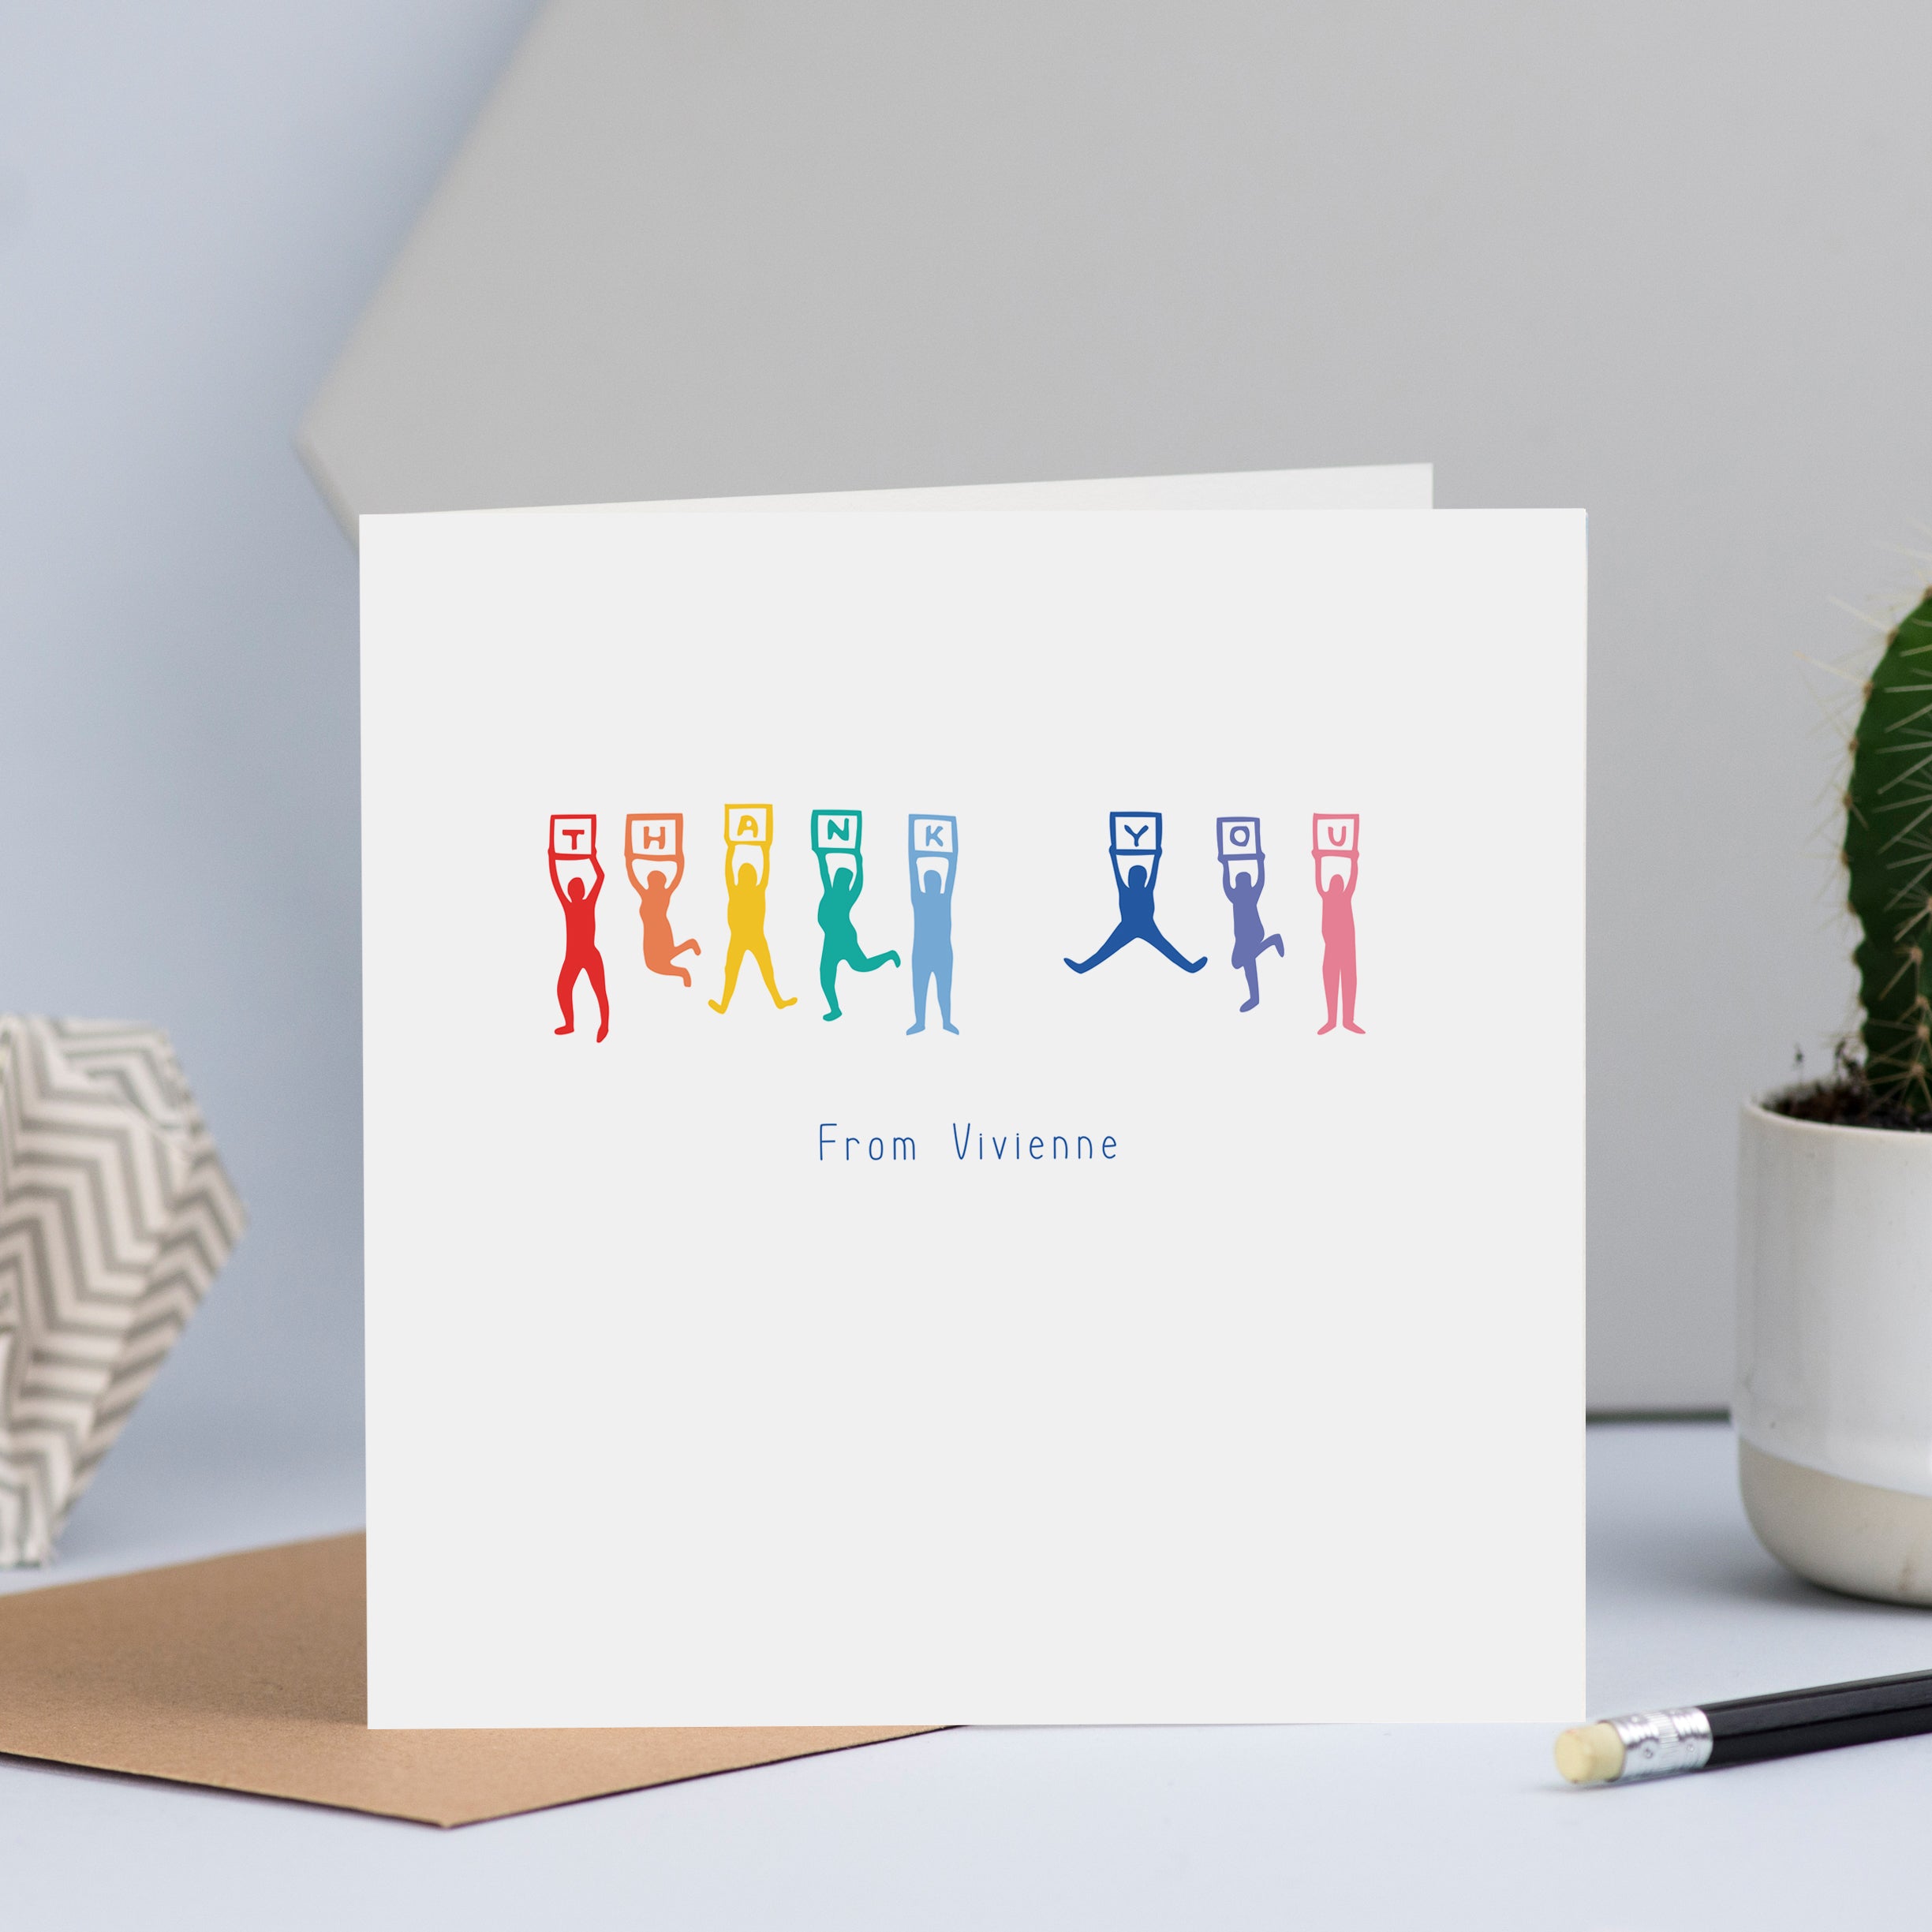 Gorgeous personalised thank you cards with a line of people jumping up and down holding signs to spell out the word "thank you".